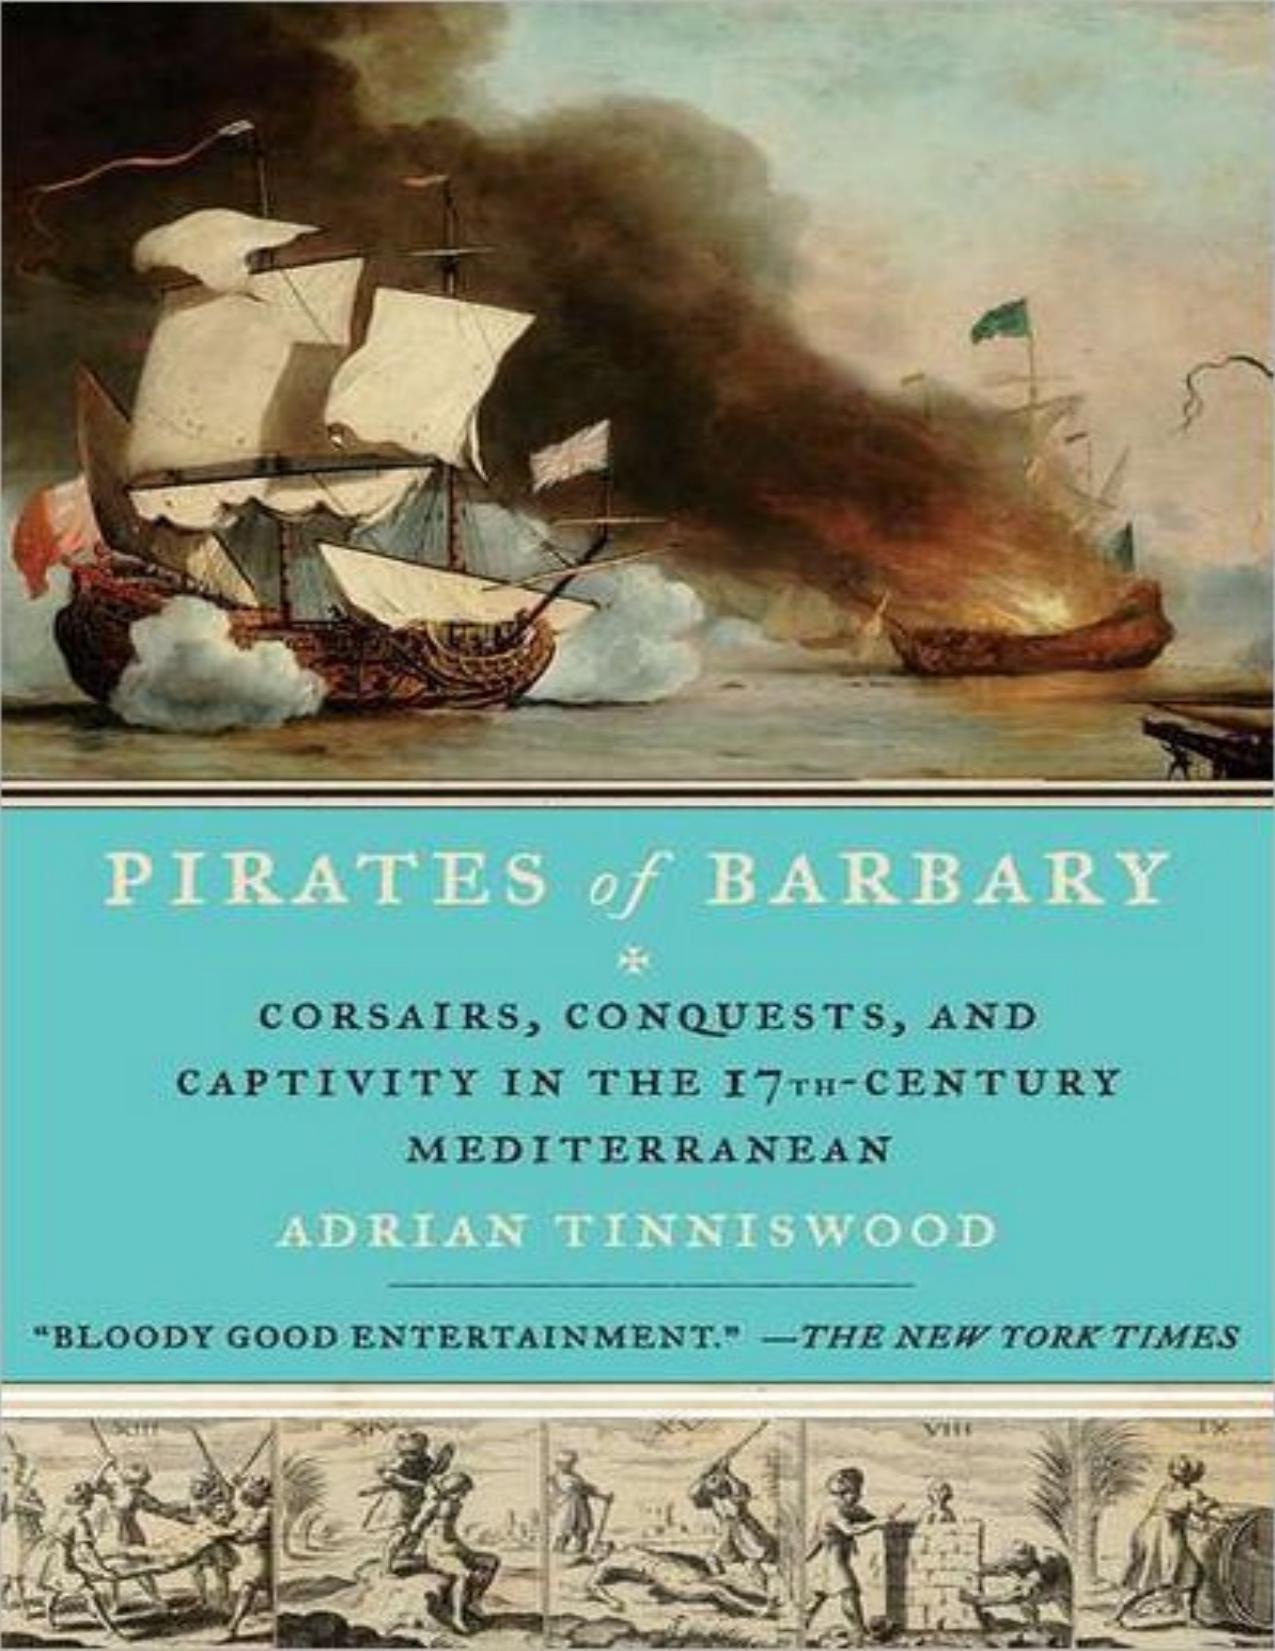 Pirates of Barbary: Corsairs, Conquests and Captivity in the Seventeenth-Century Mediterranean by Adrian Tinniswood